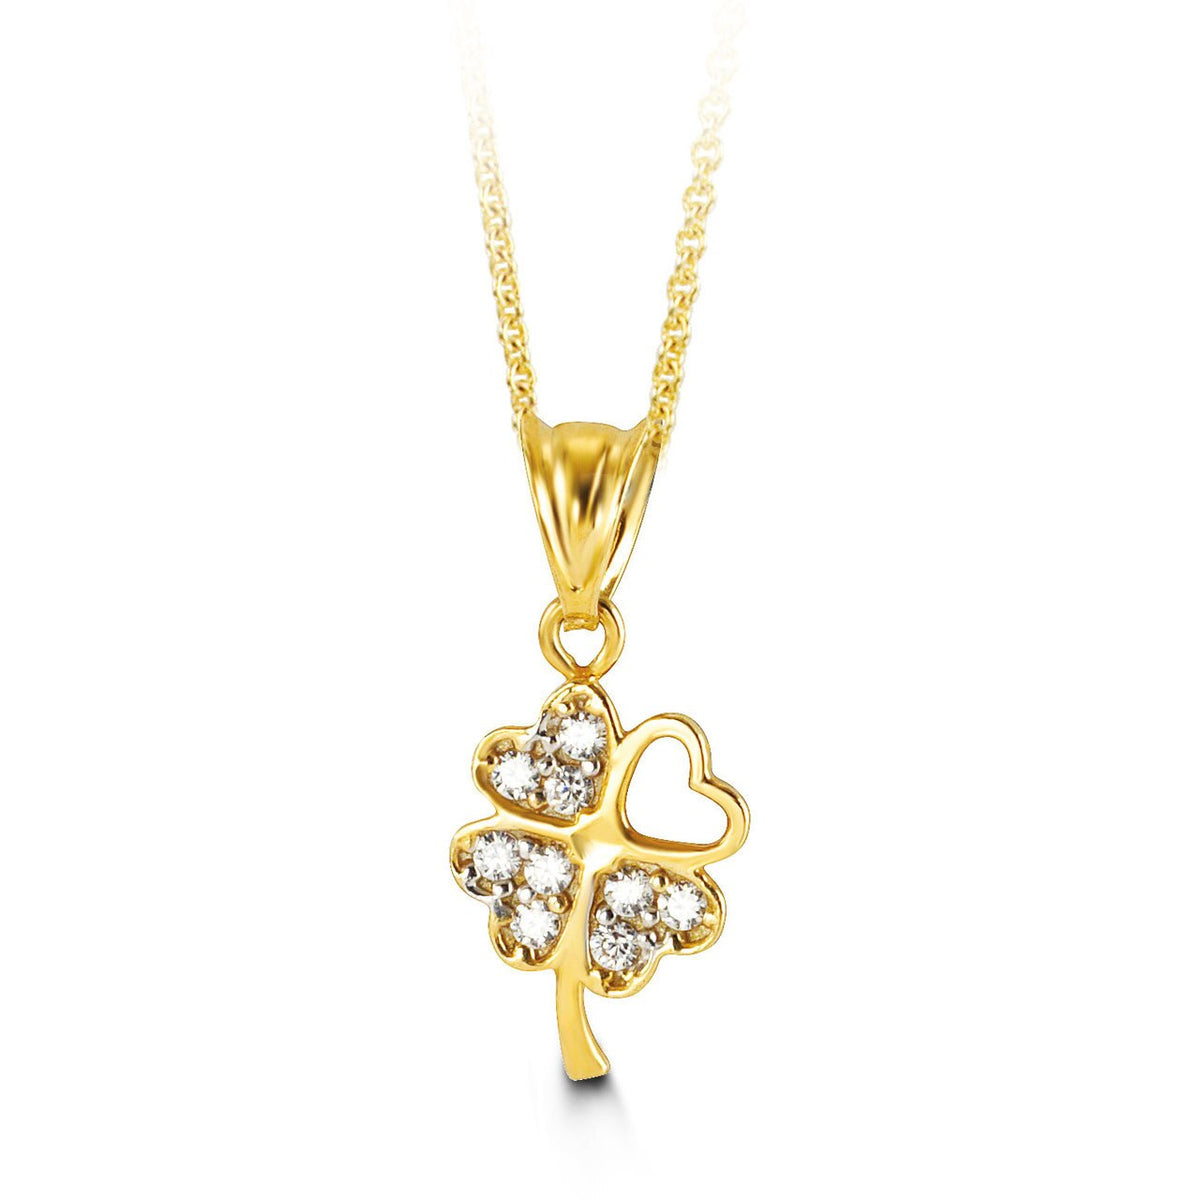 10K Yellow Gold CZ Clover Heart Charm Pendant with Chain